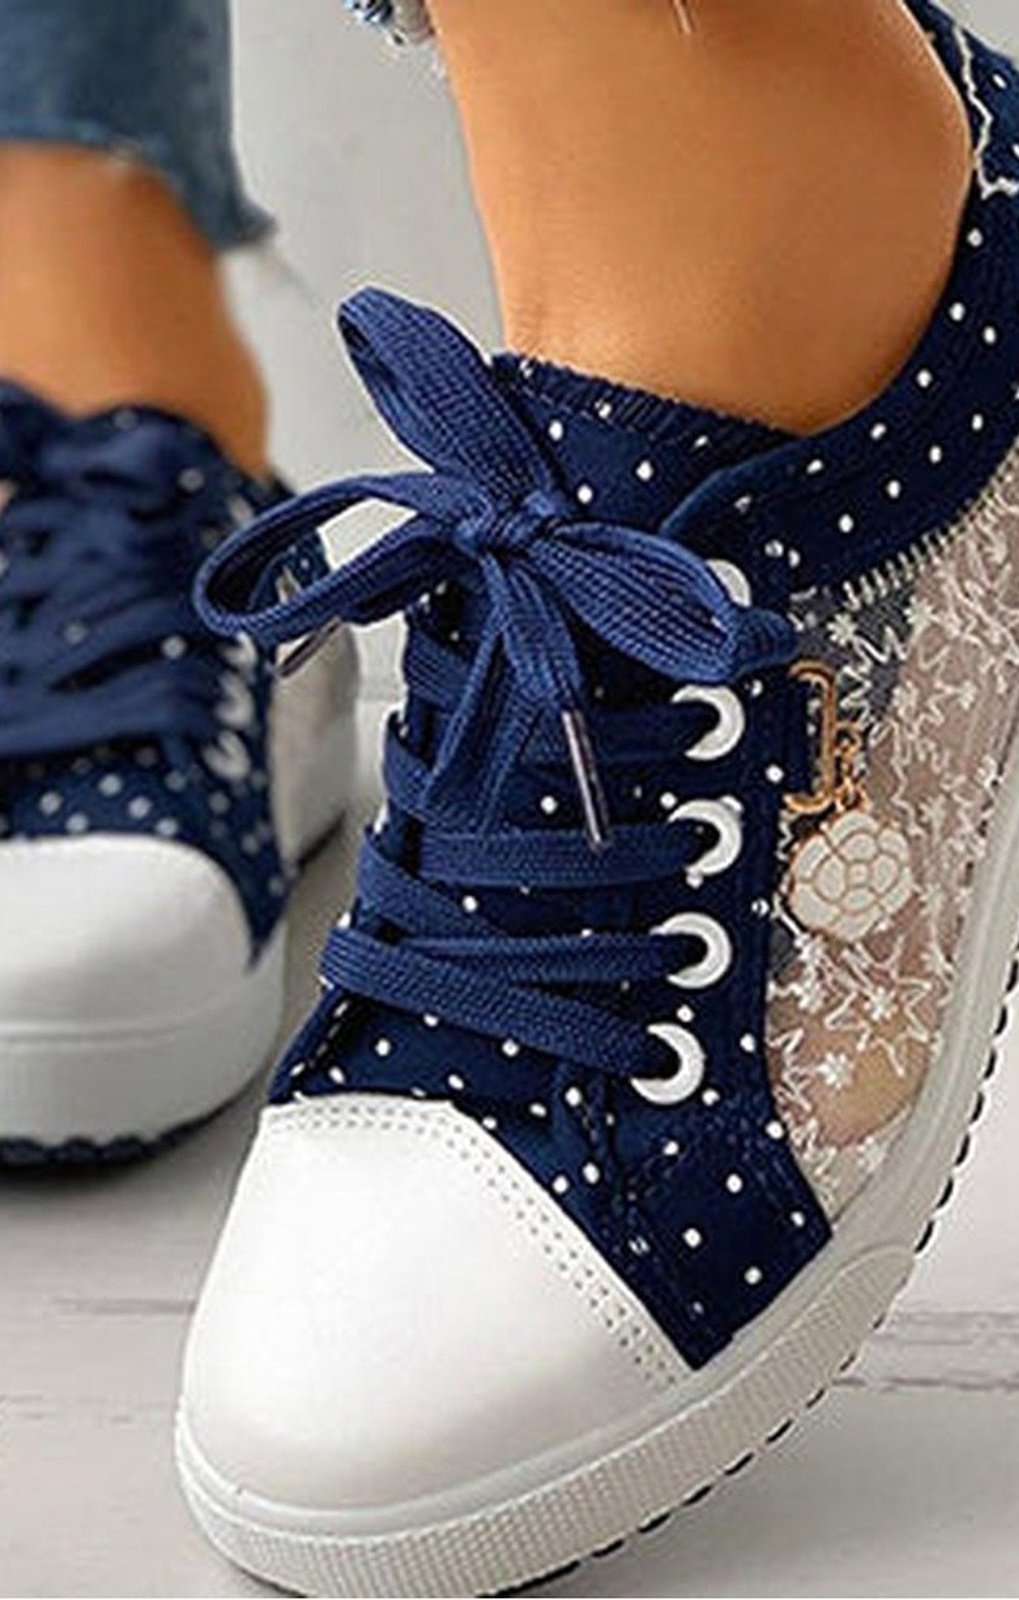 Lace up rubber lace sneakers